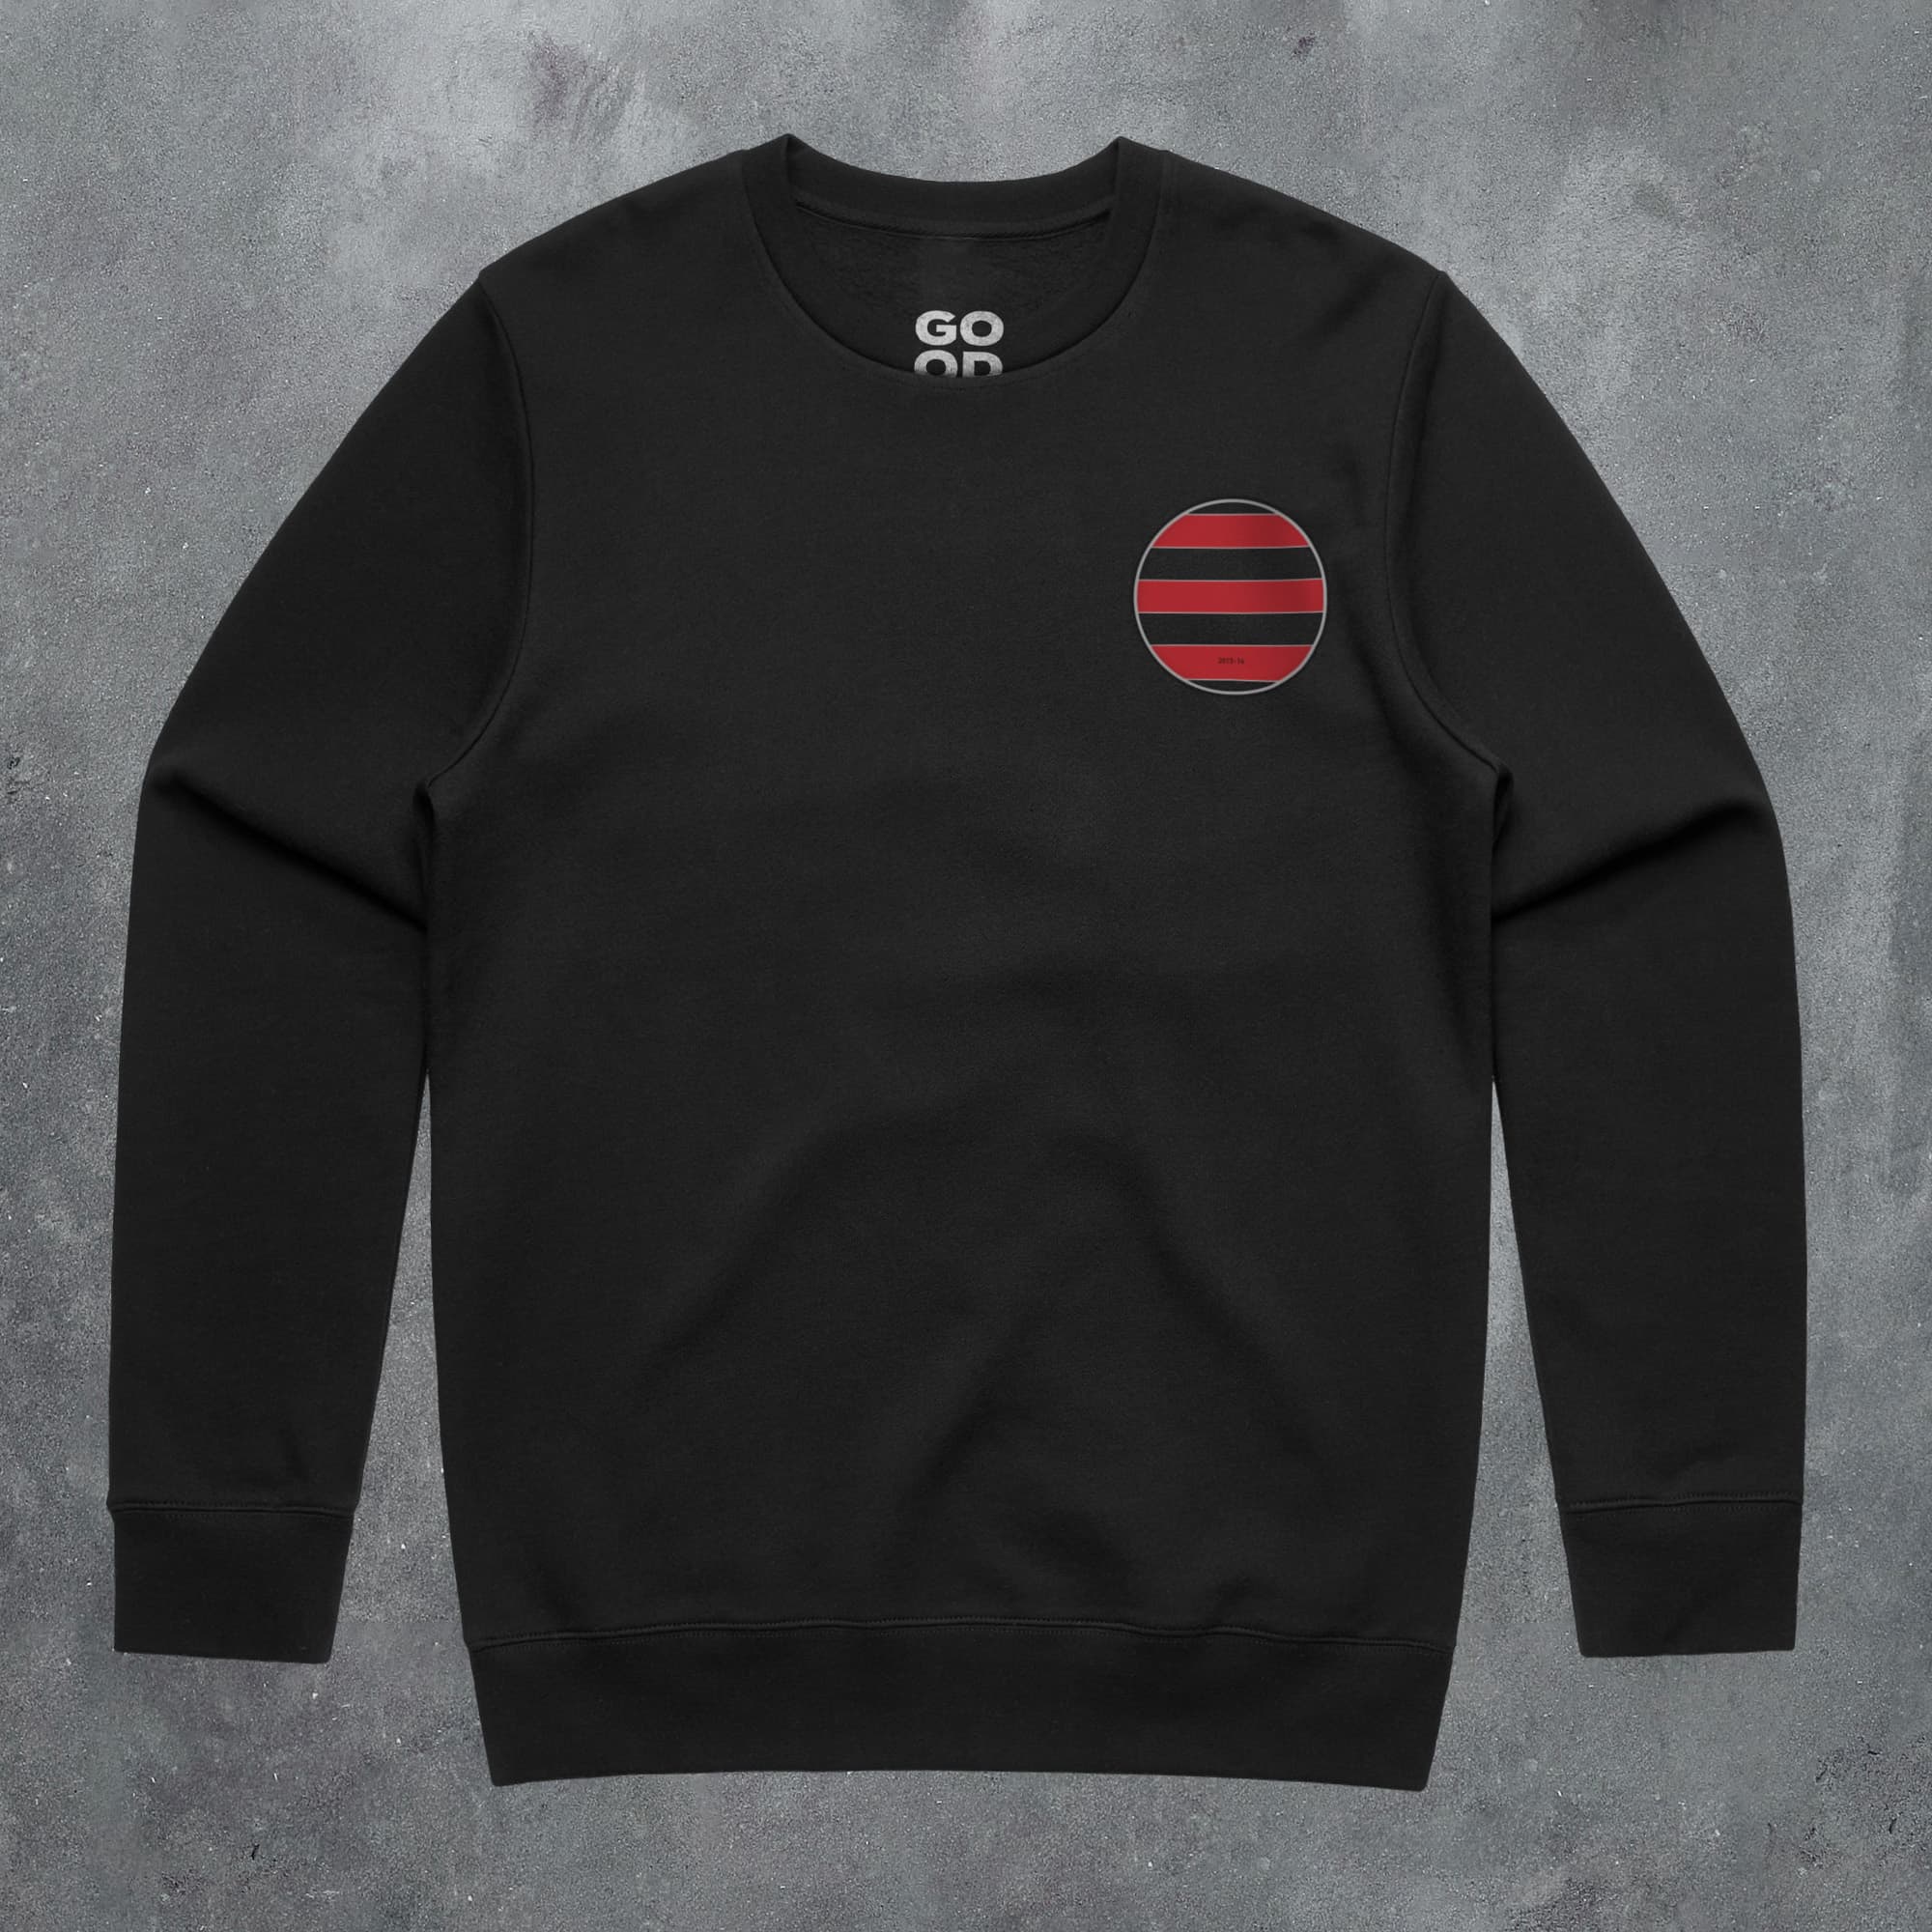 a black sweatshirt with a red circle on the chest